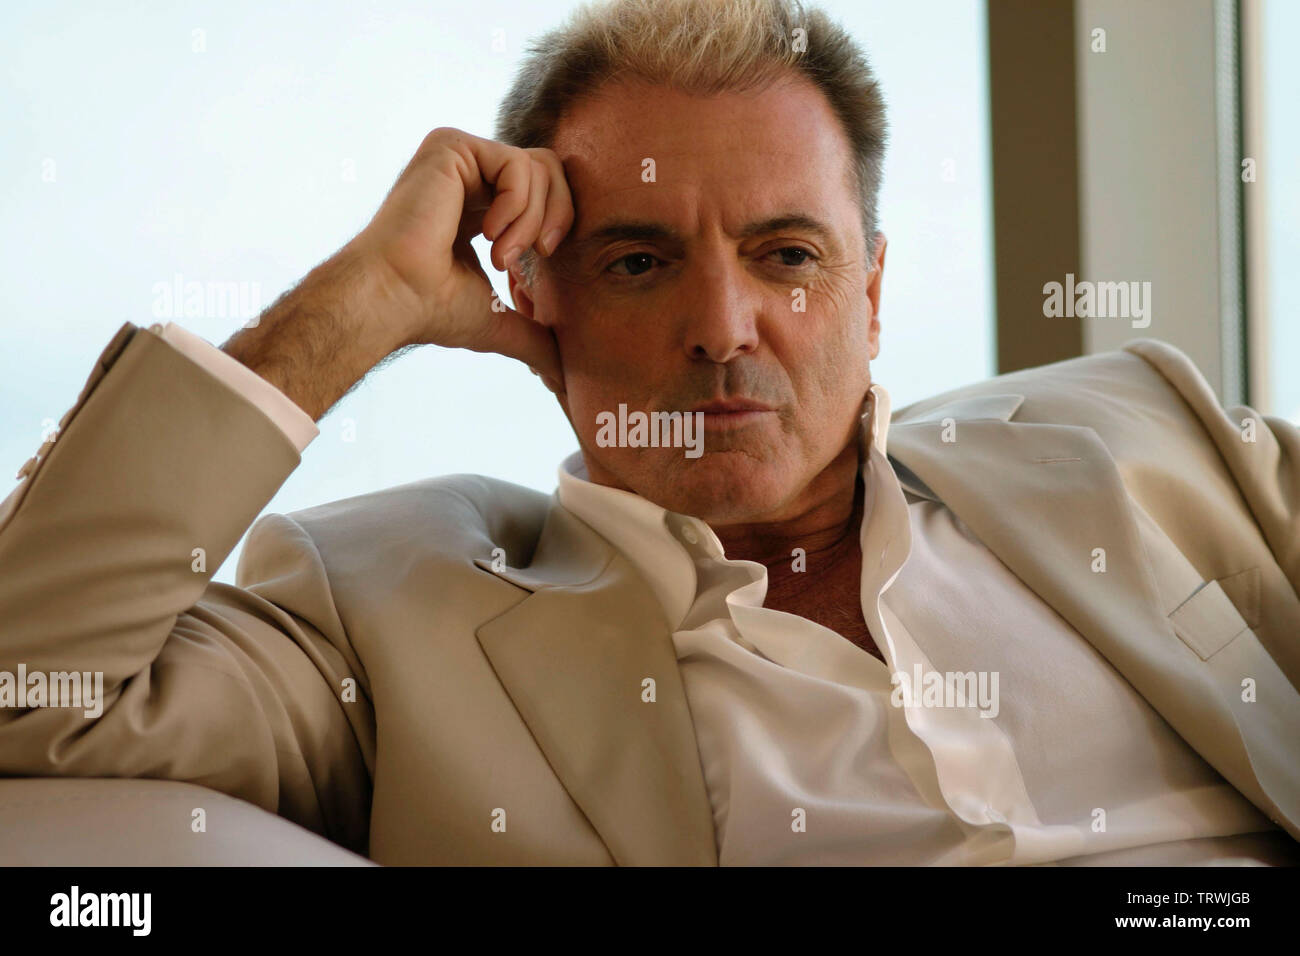 ARMAND ASSANTE in TWO FOR THE MONEY (2005). Copyright: Editorial use only. No merchandising or book covers. This is a publicly distributed handout. Access rights only, no license of copyright provided. Only to be reproduced in conjunction with promotion of this film. Credit: UNIVERSAL PICTURES / Album Stock Photo